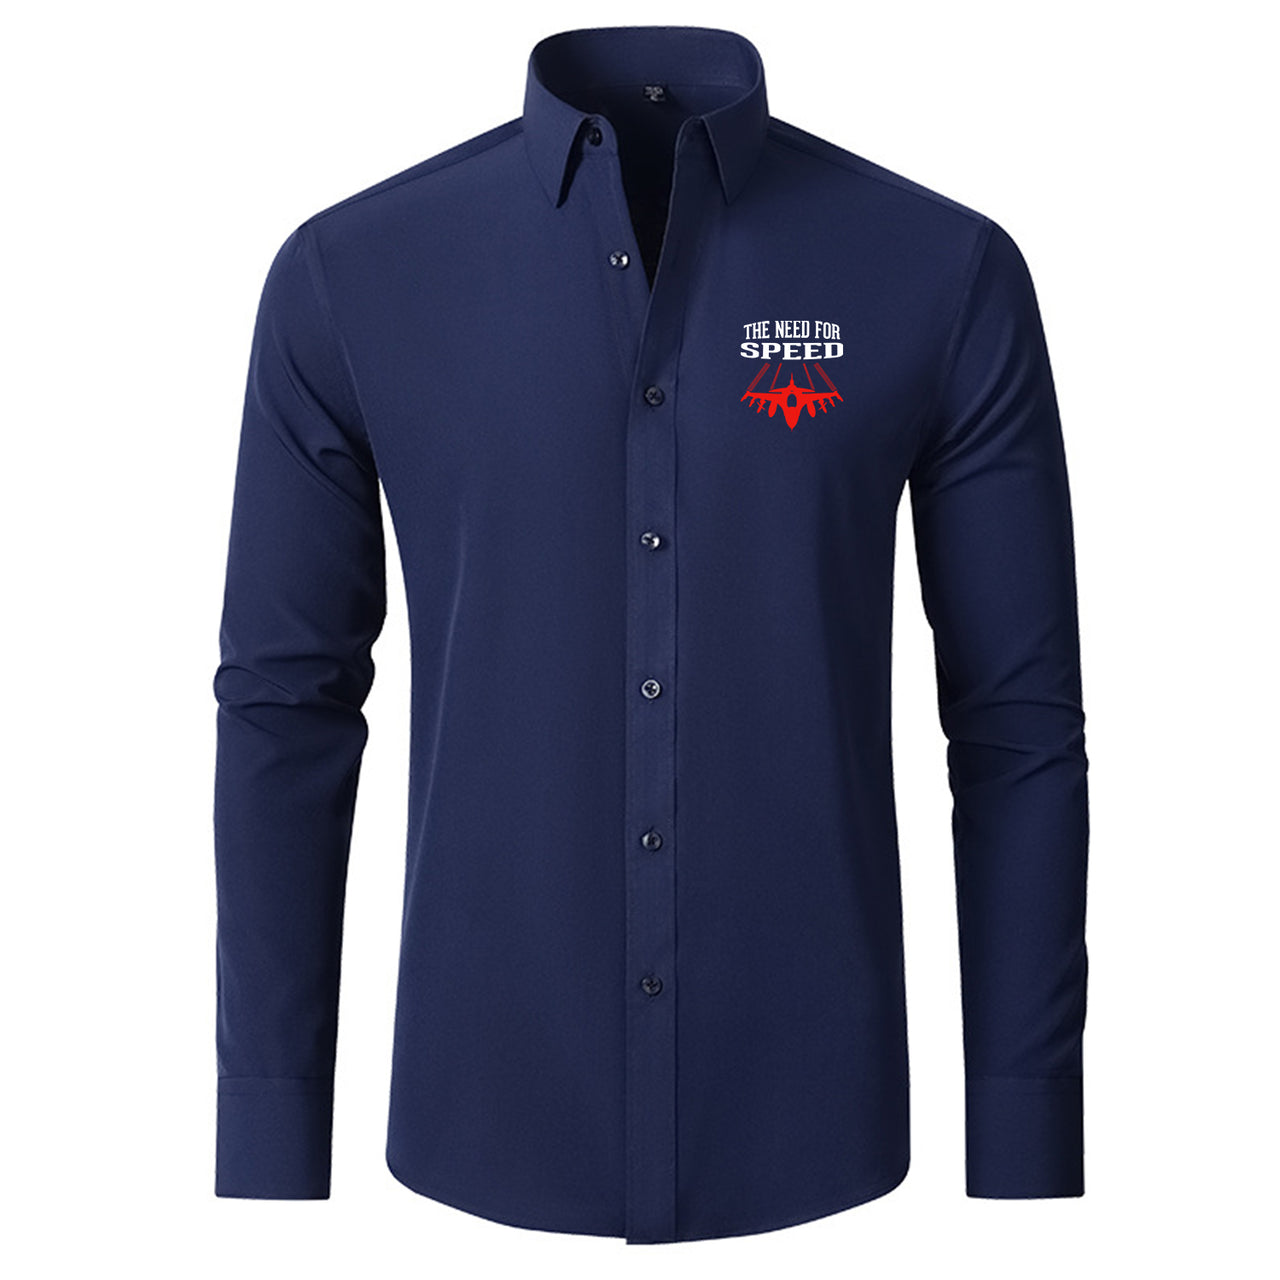 The Need For Speed Designed Long Sleeve Shirts